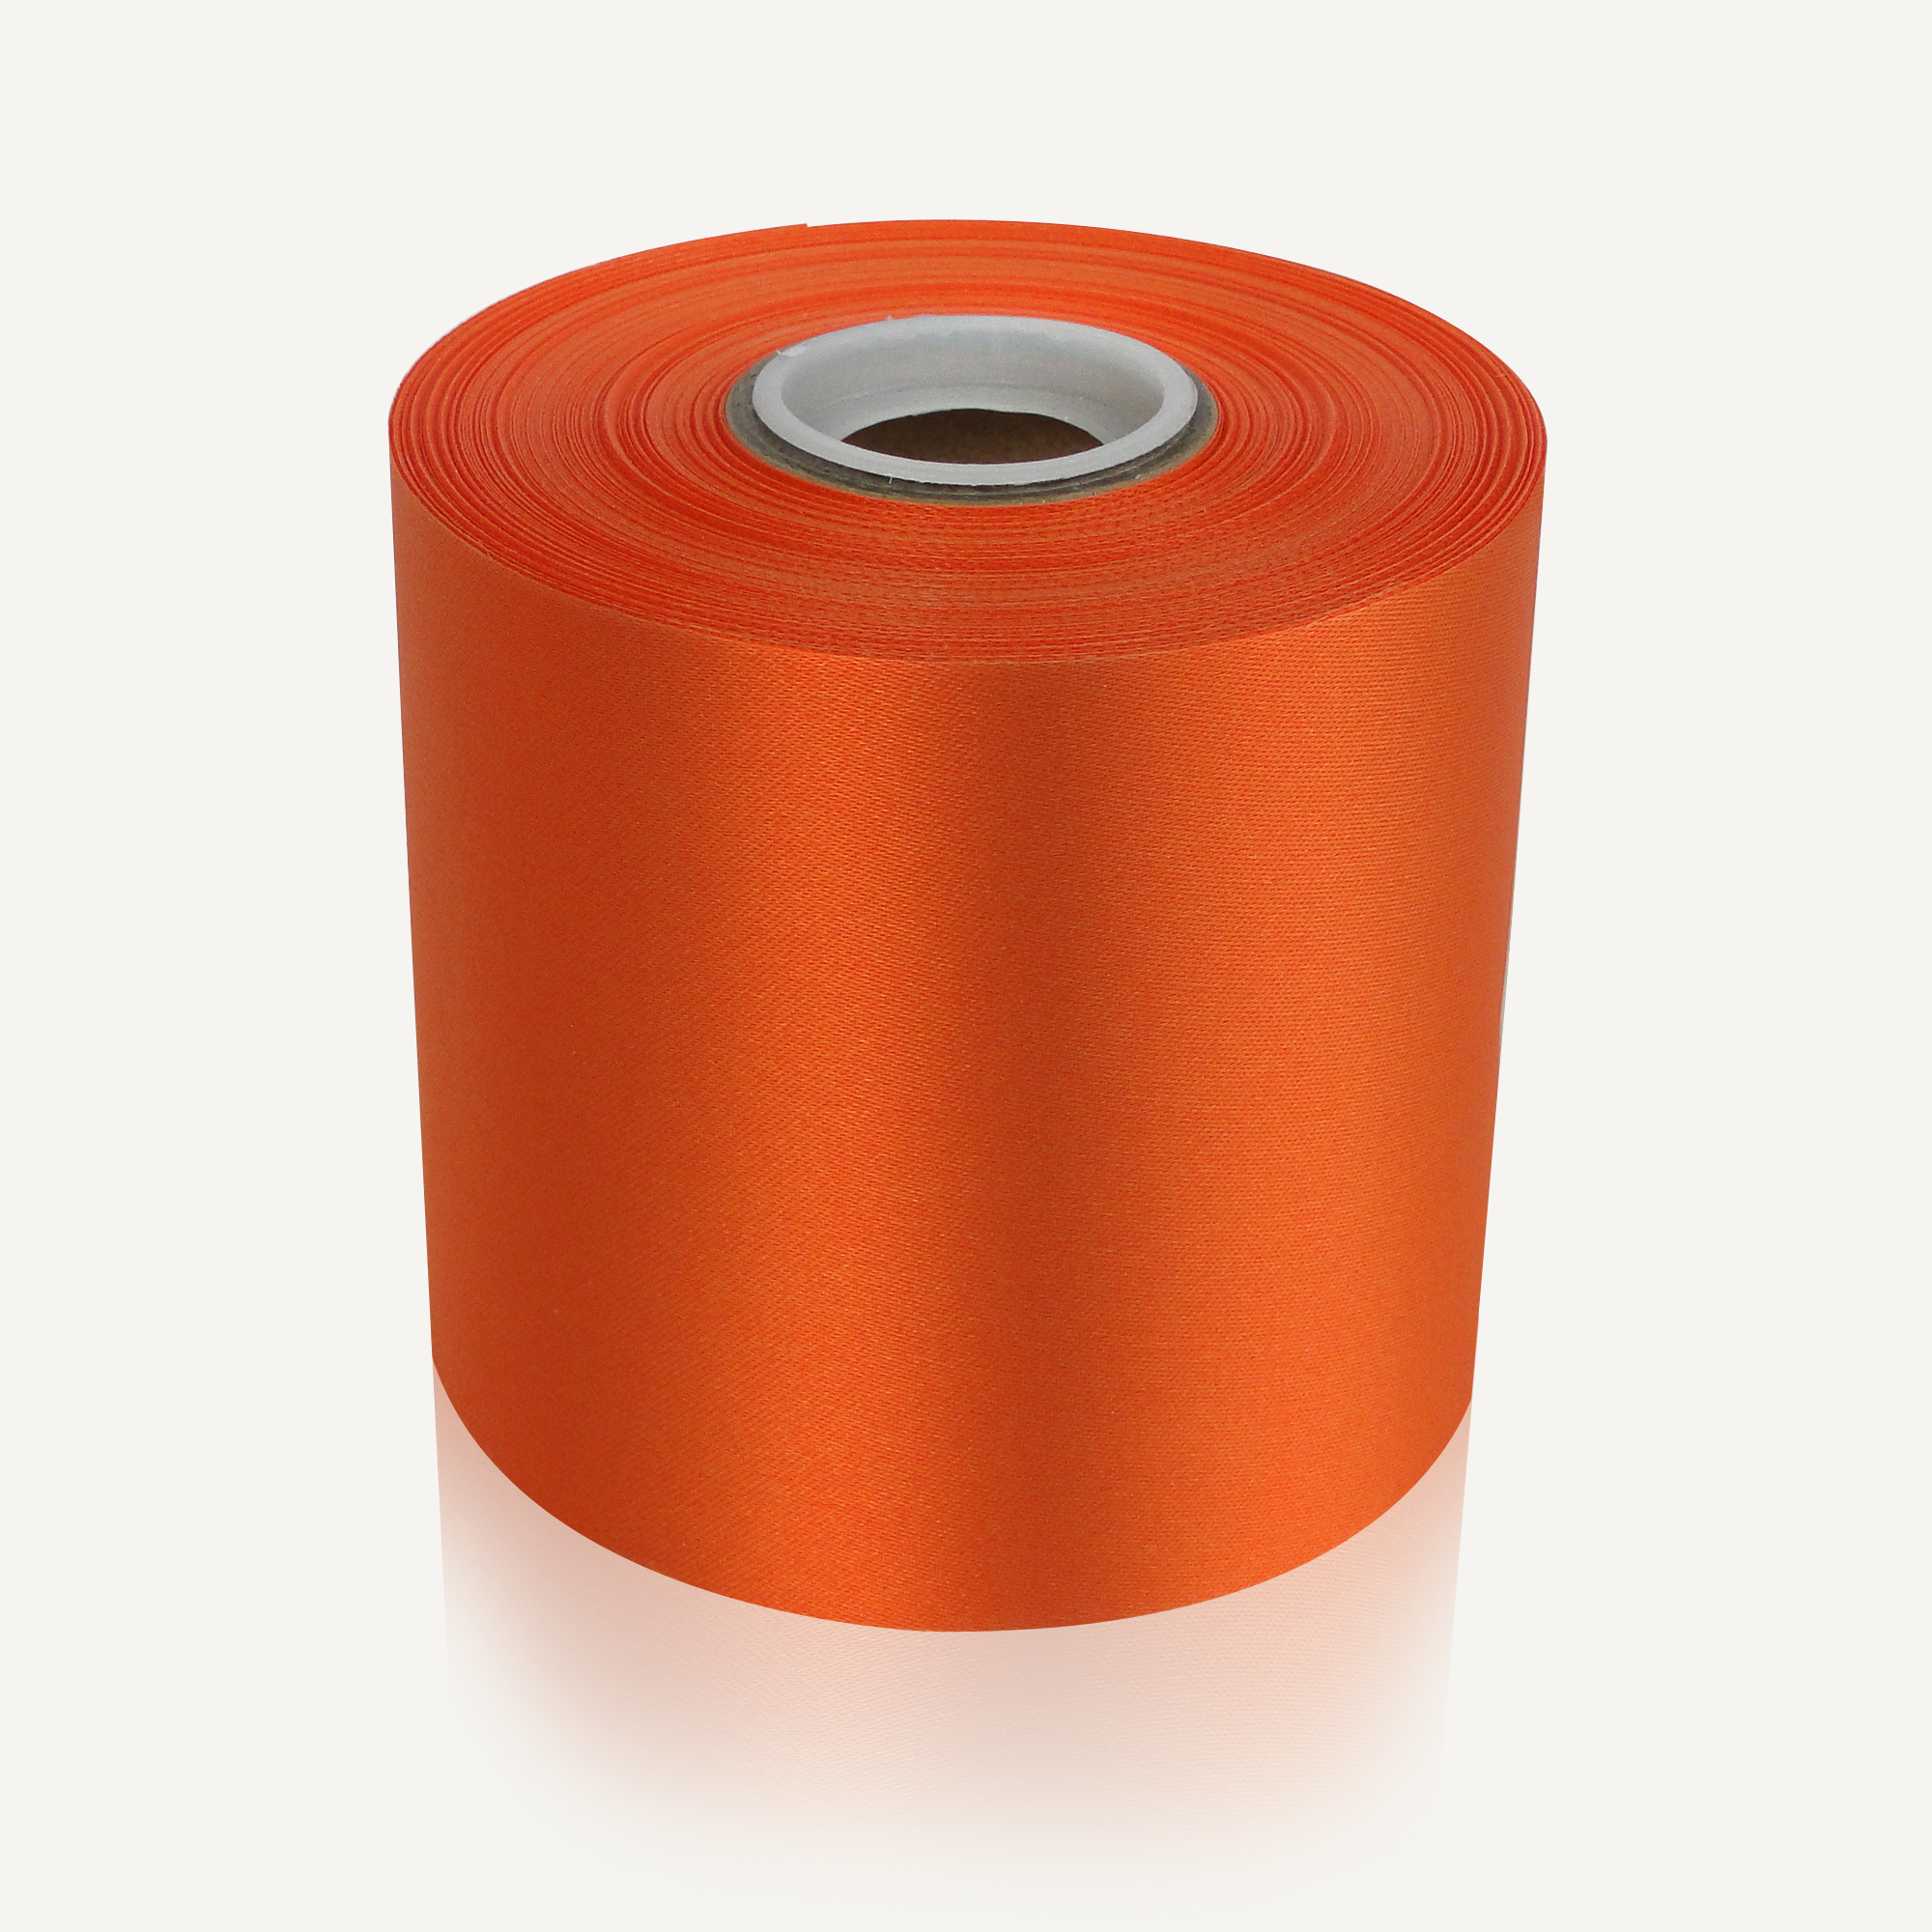 lot of satin ribbon. 1/4 inch wide. Some plain and some edged. Plain are  orange